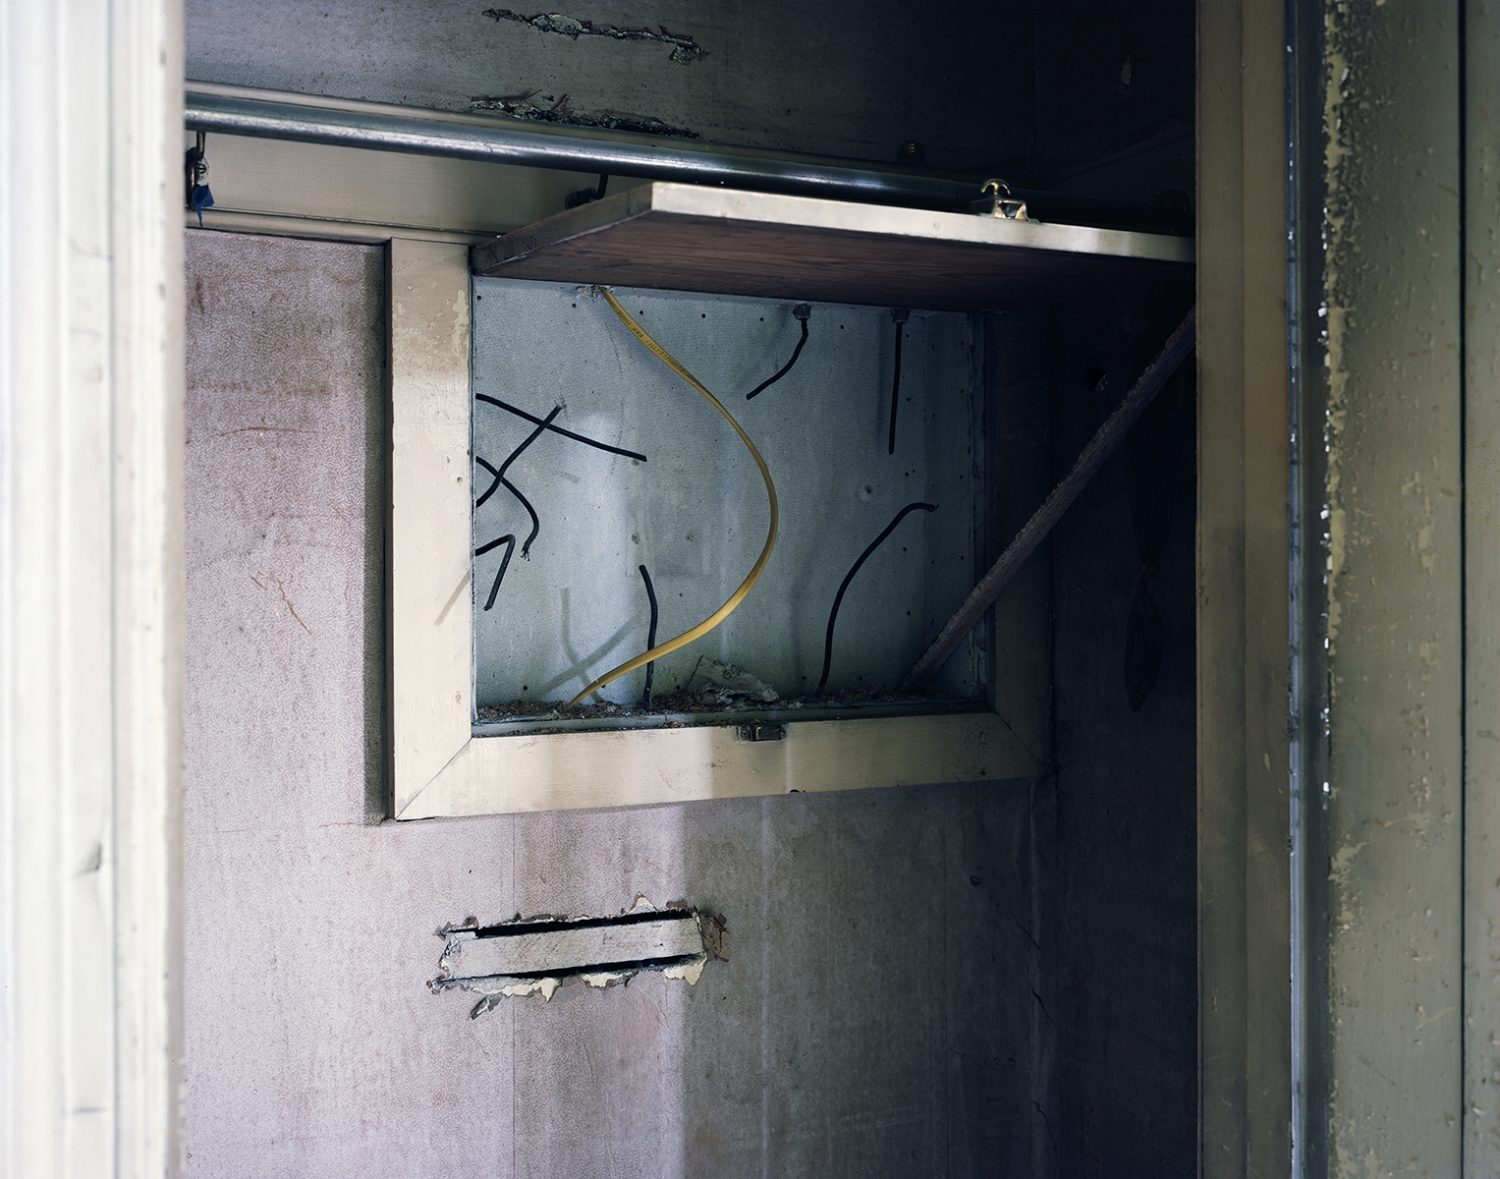 Fuse Box, 2018, Archival inkjet print from a scanned 8x10 negative